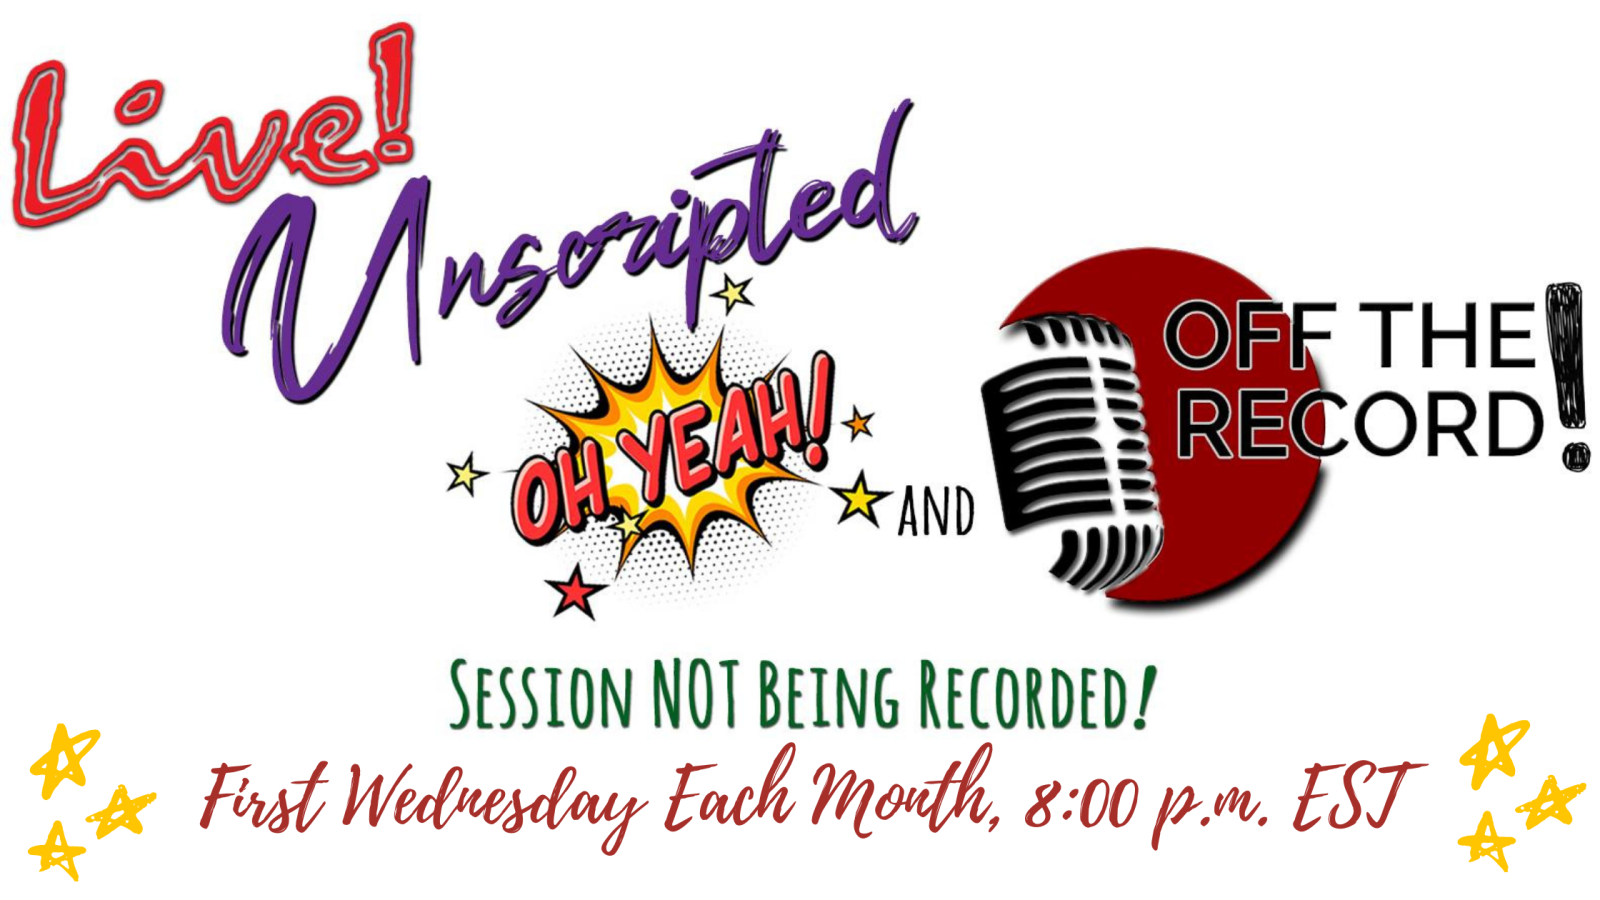 Live, Unscripted, Unrecorded, & Off the Record!